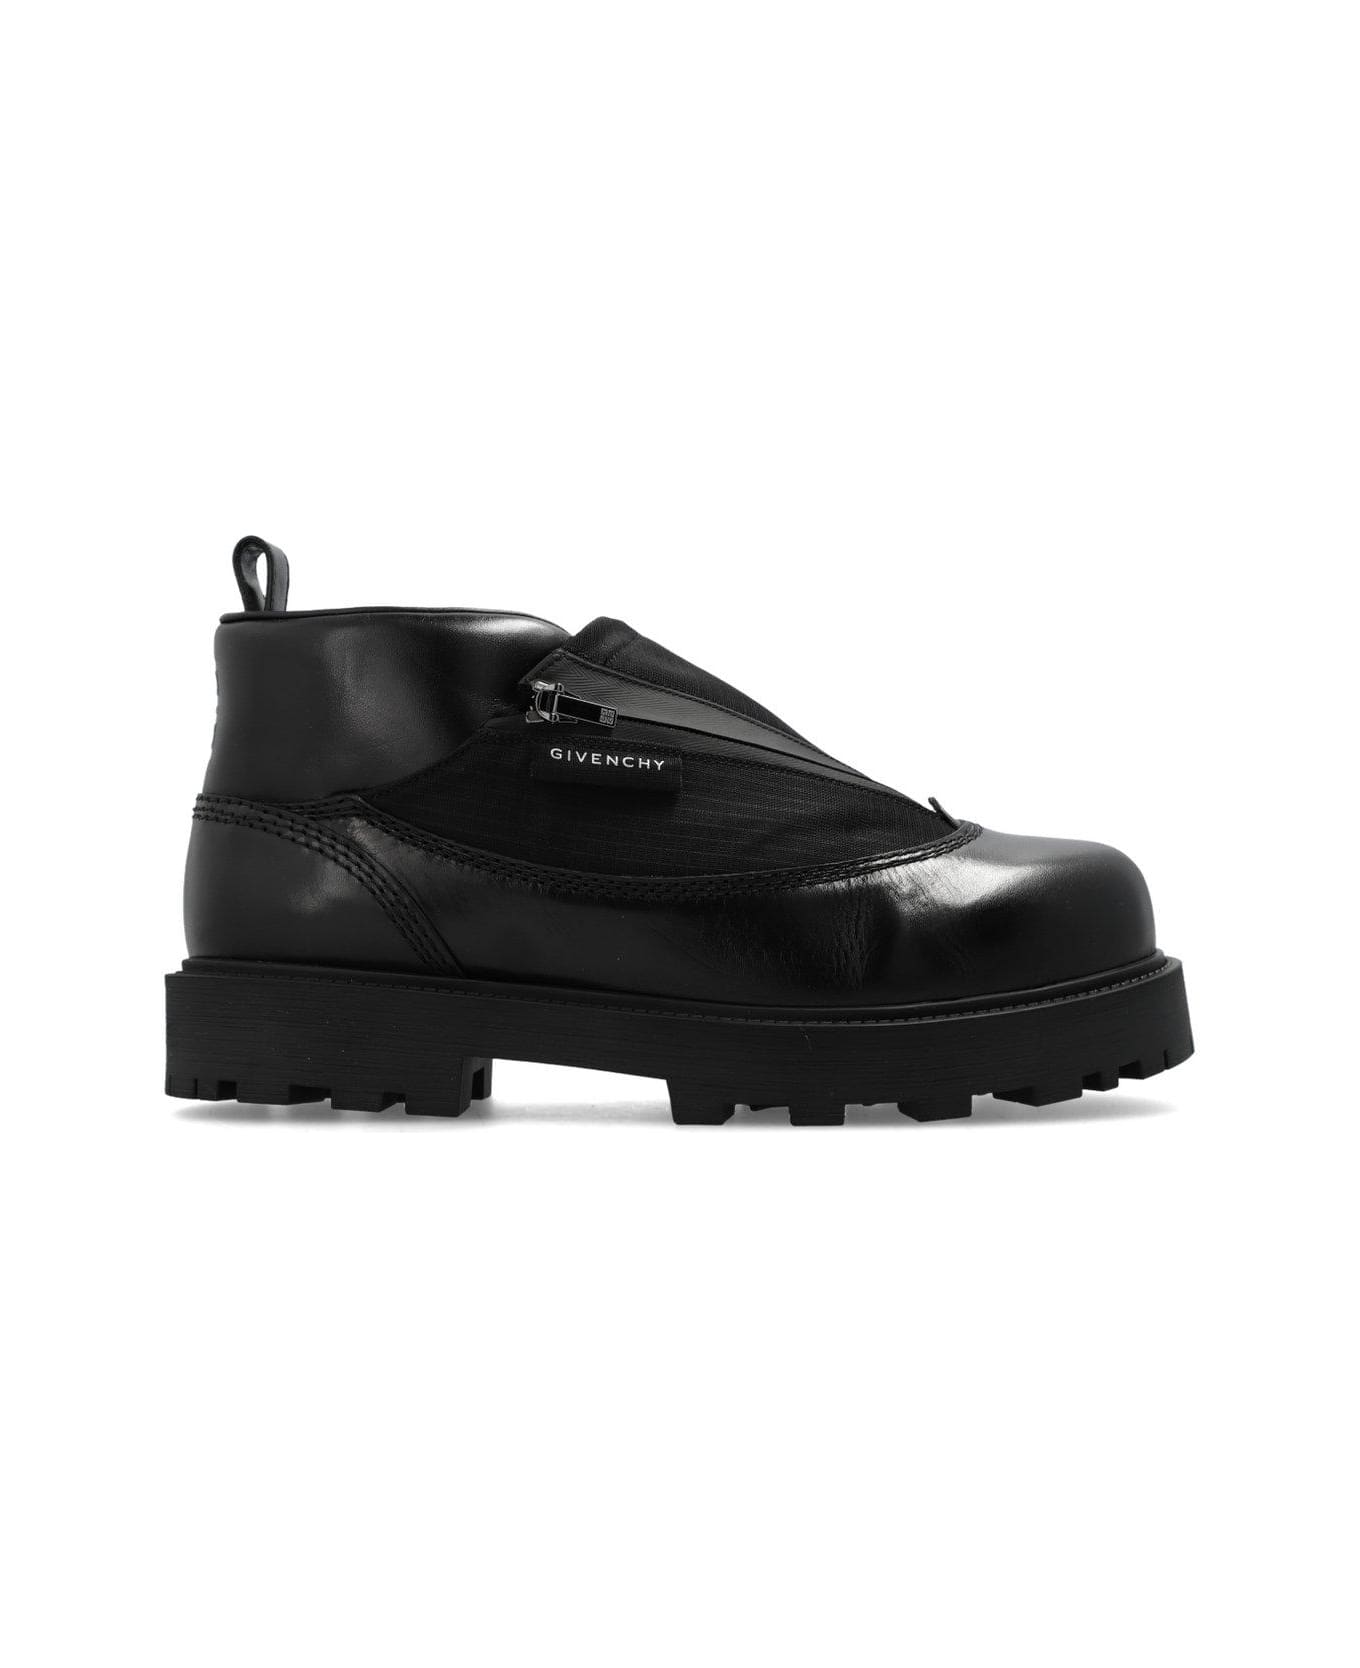 Givenchy Storm Ankle Boots - Black